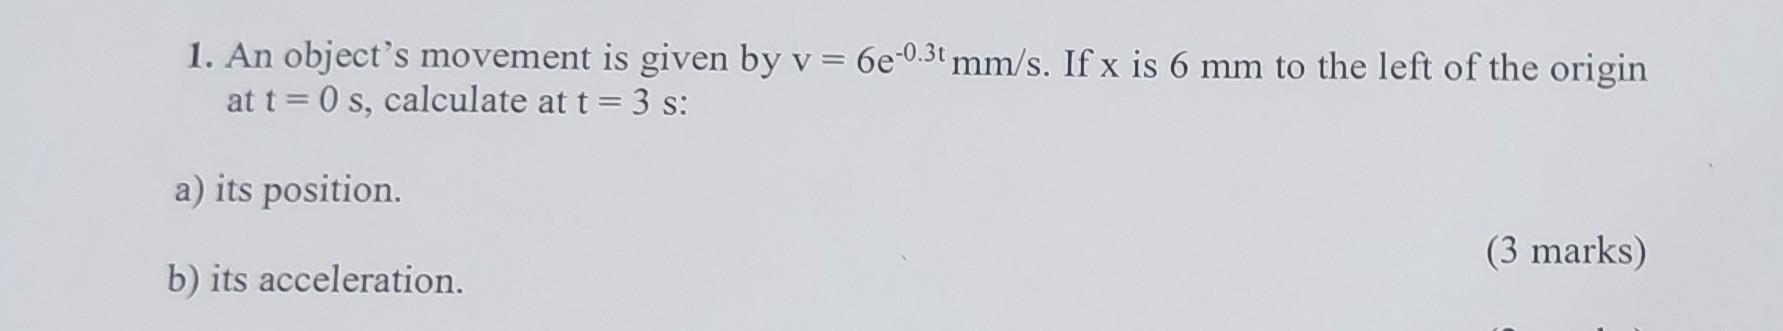 1. An object's movement is given by v = 6e-0.3t mm/s. If x is 6 mm to the left of the origin at t=0 s,